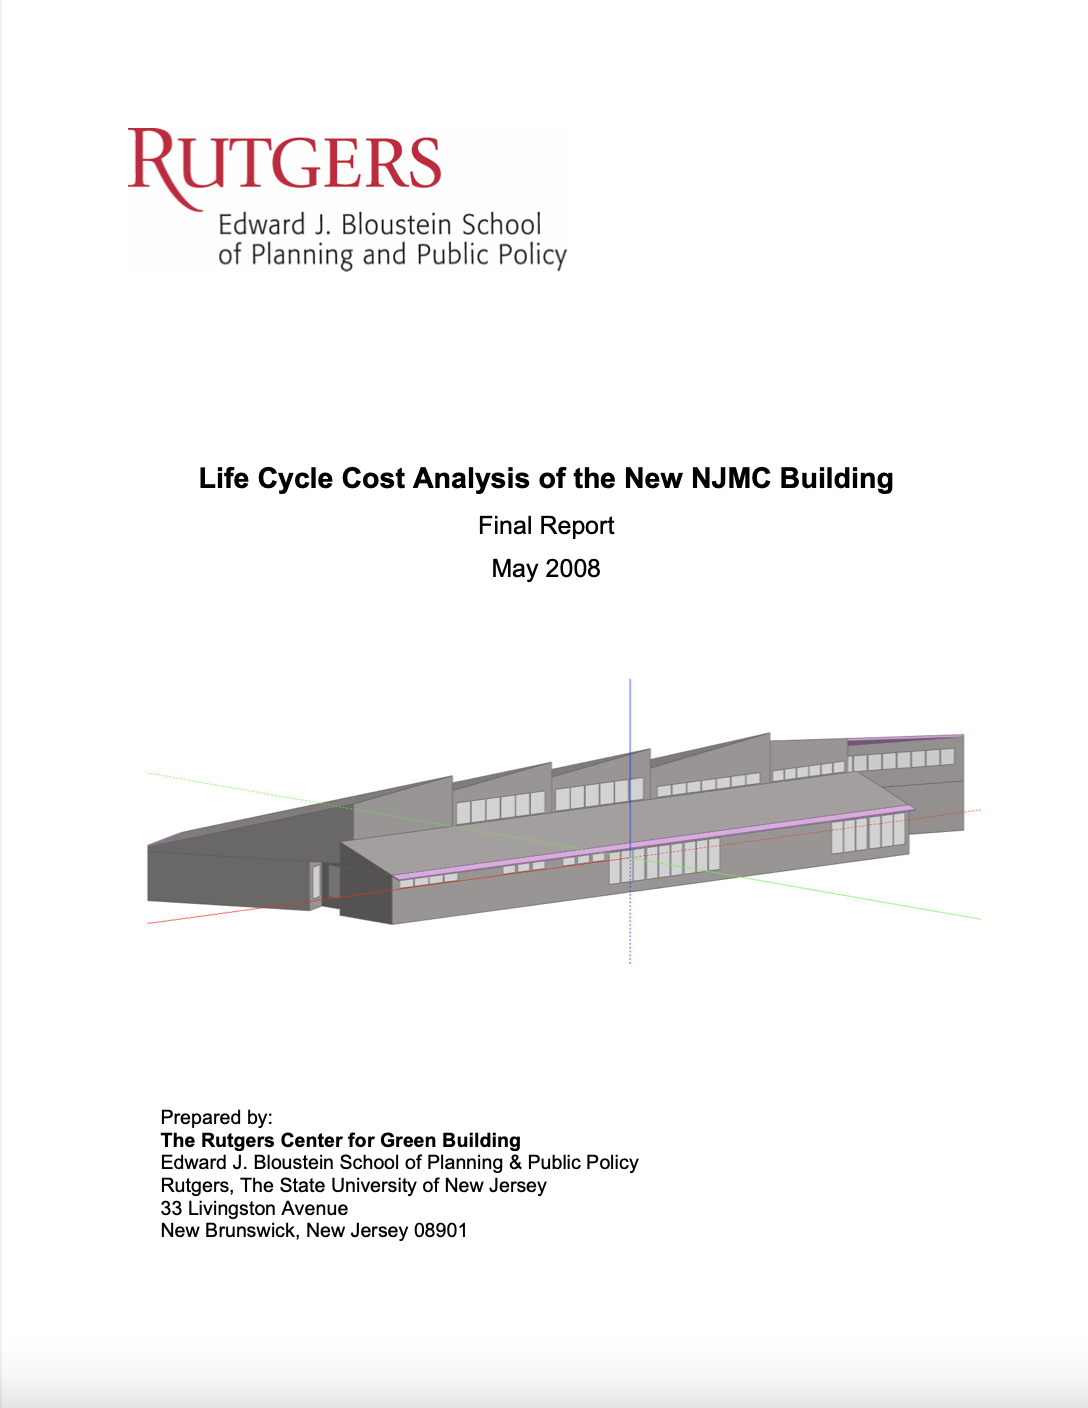 Life Cycle Cost Analysis of the New NJMC Building